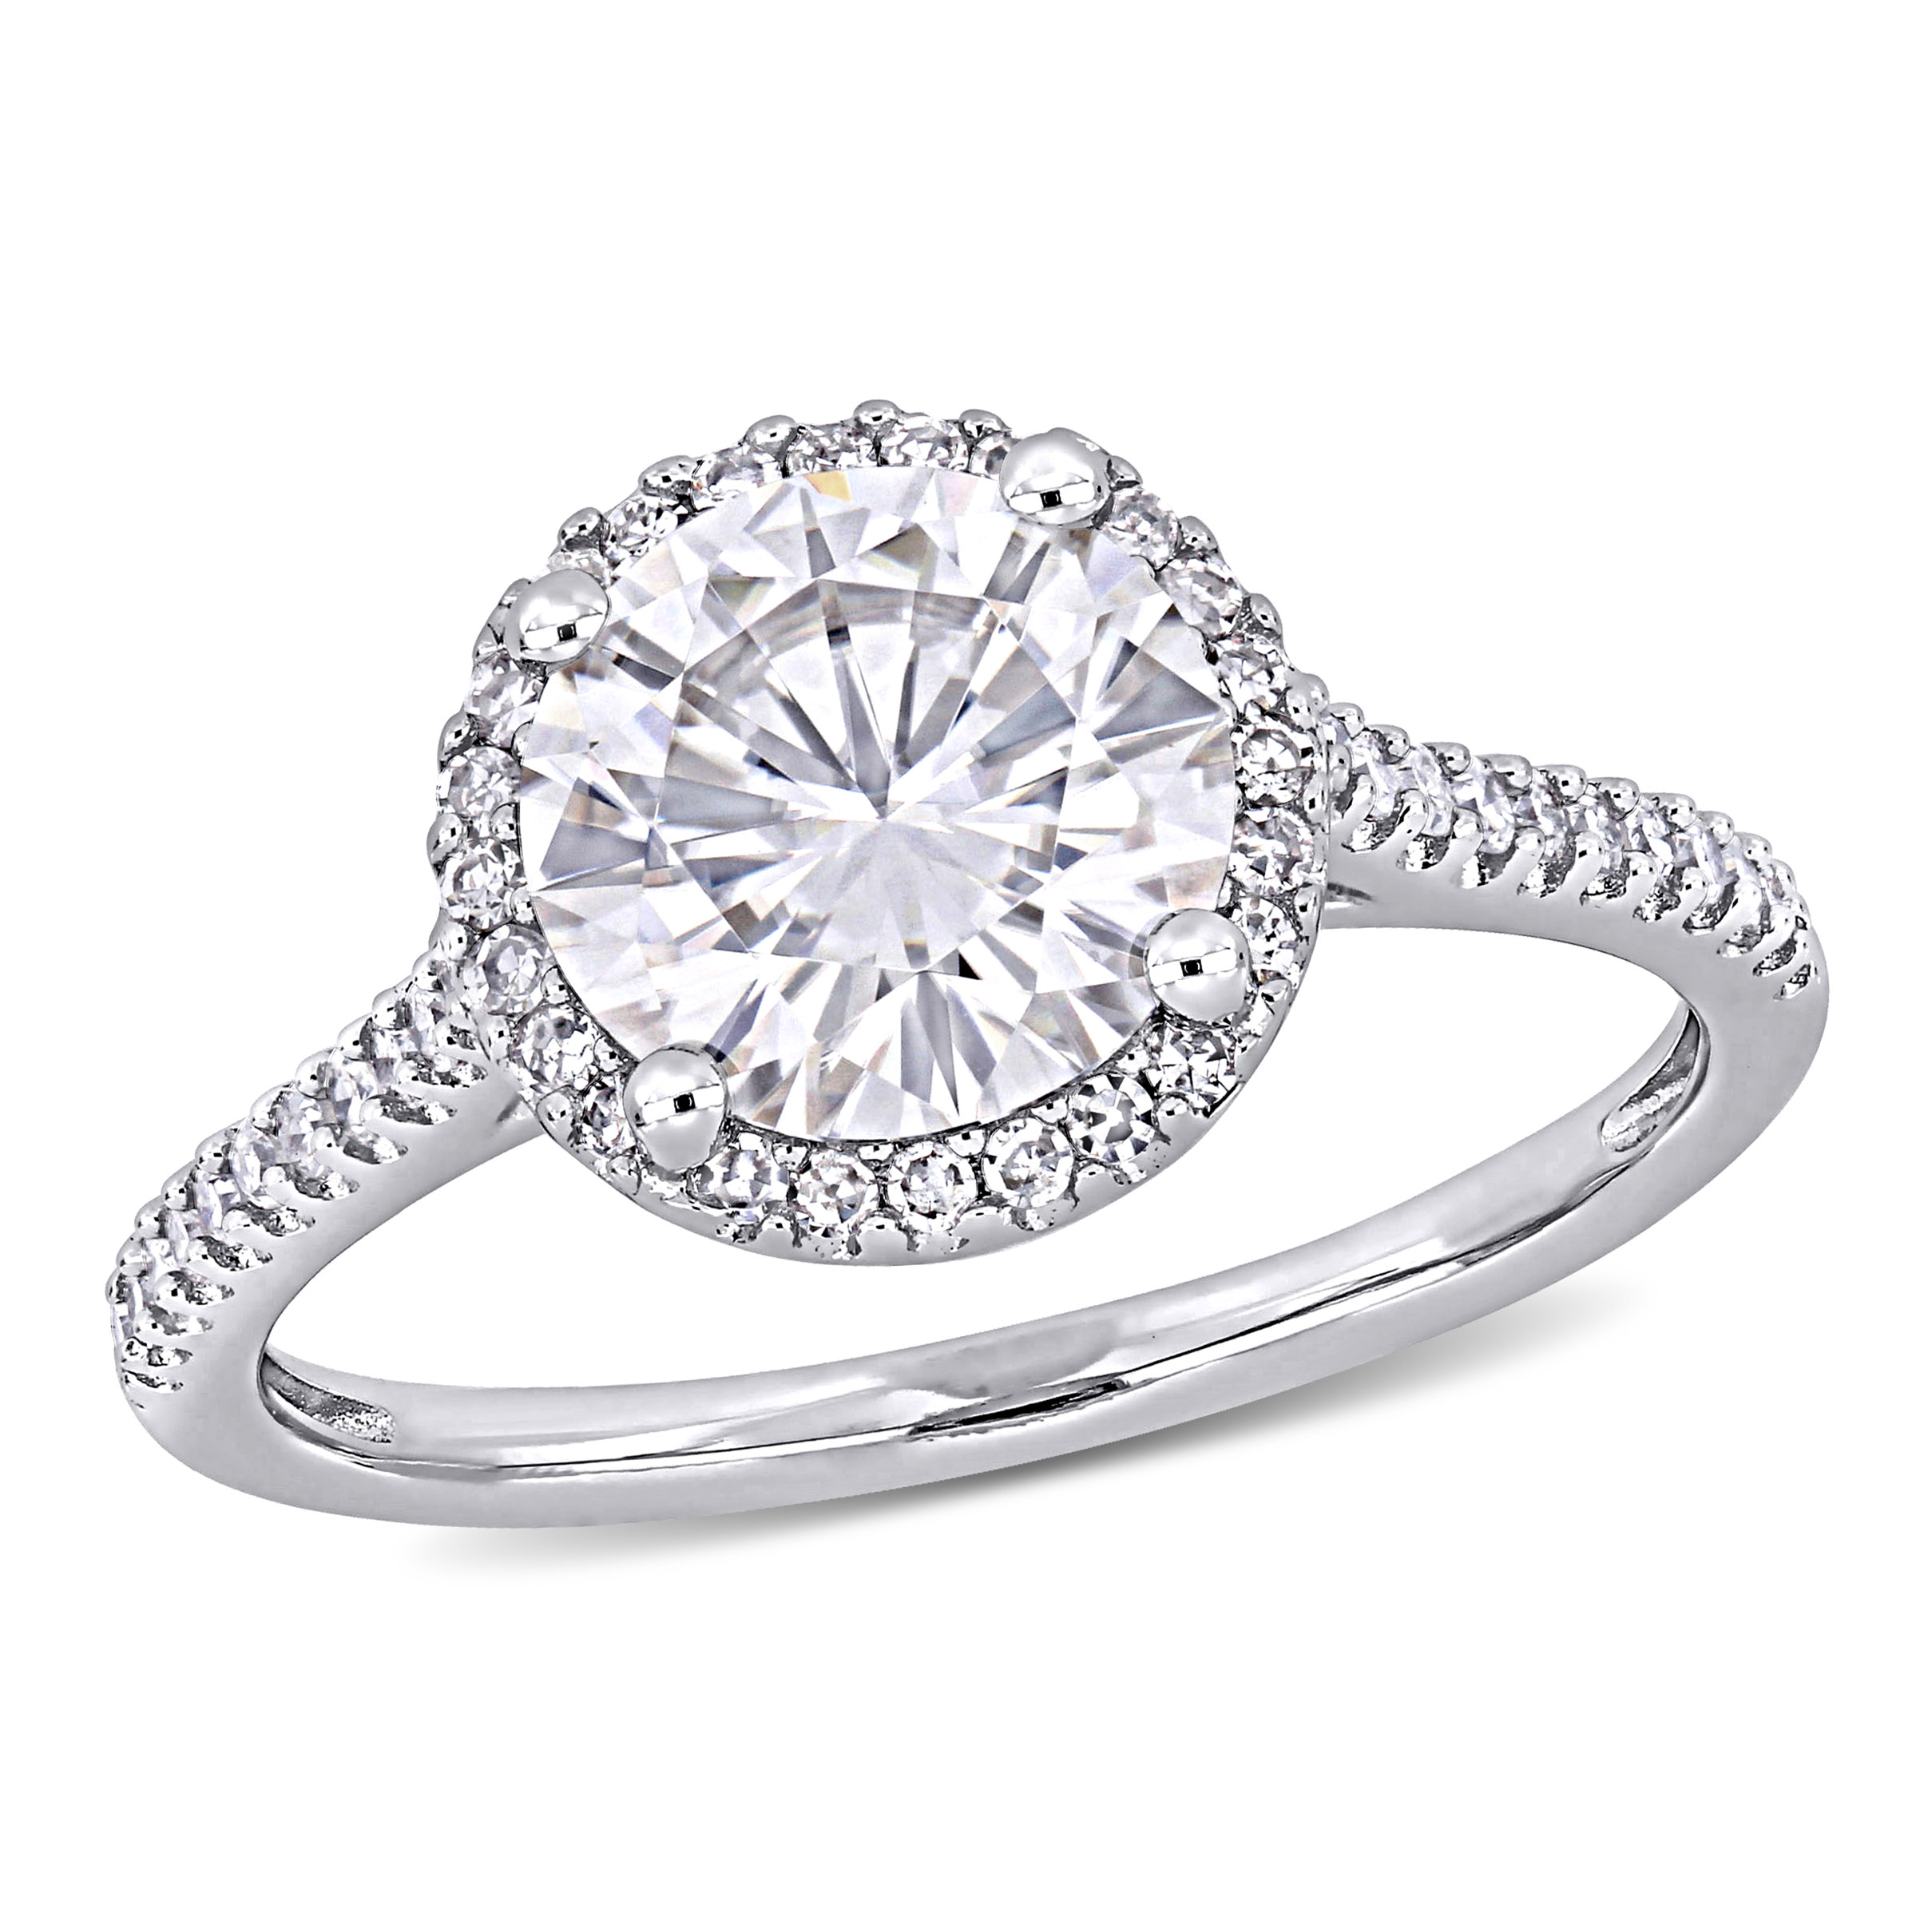 2 CT DEW Created Moissanite and 1/4 CT TW Diamond Engagement Ring in 14k White Gold